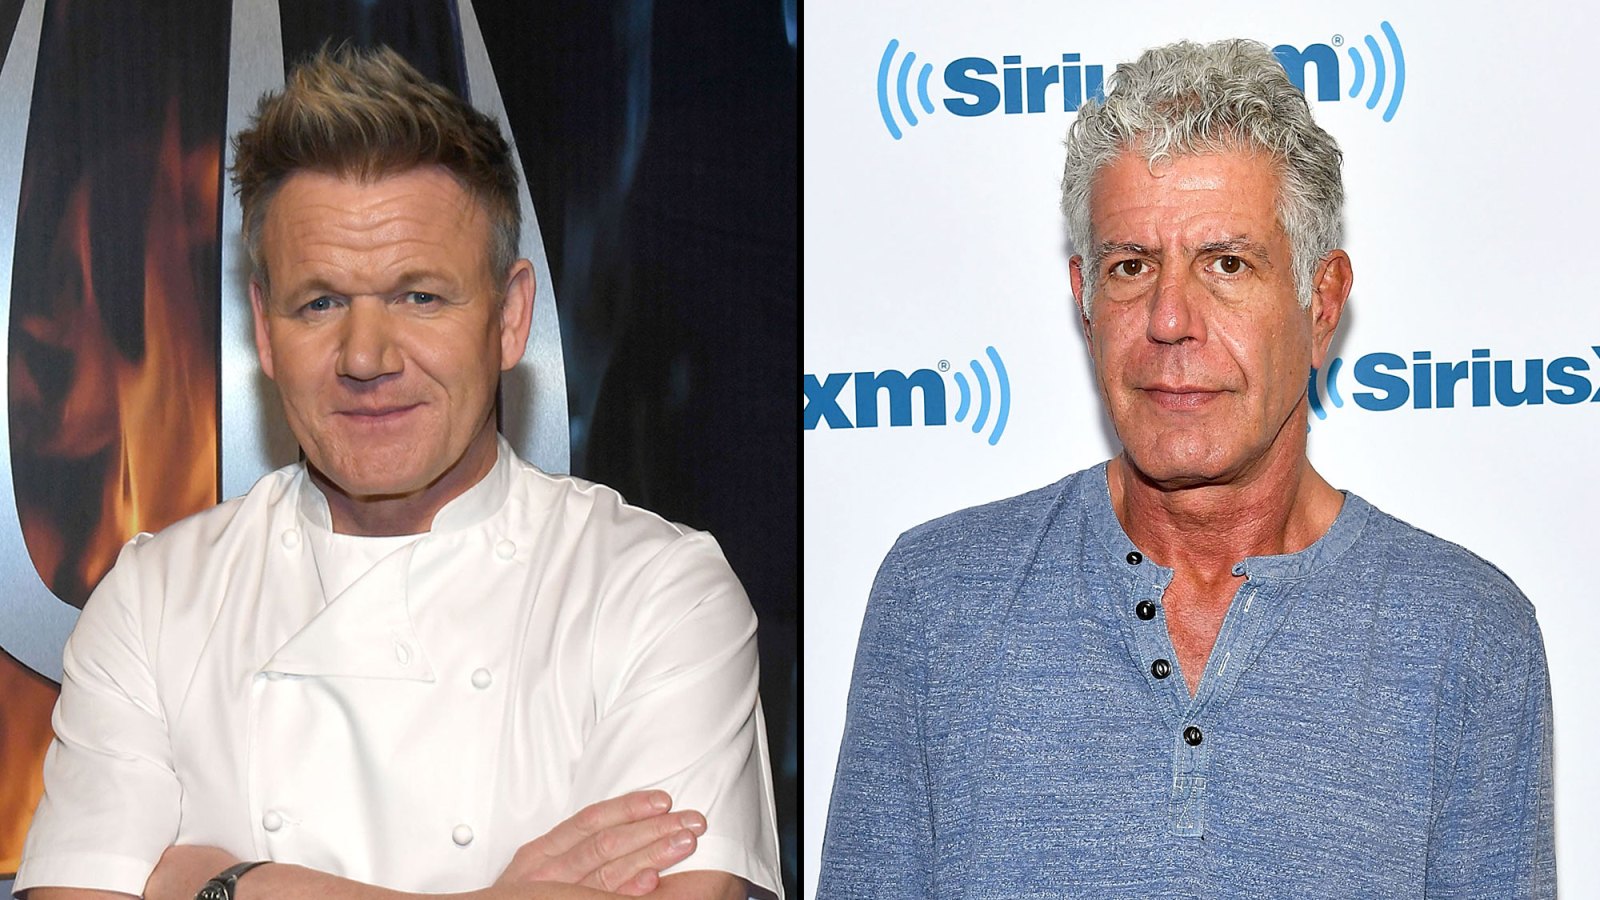 Gordon Ramsay: Comparisons of New Show, Anthony Bourdain, Are Wrong